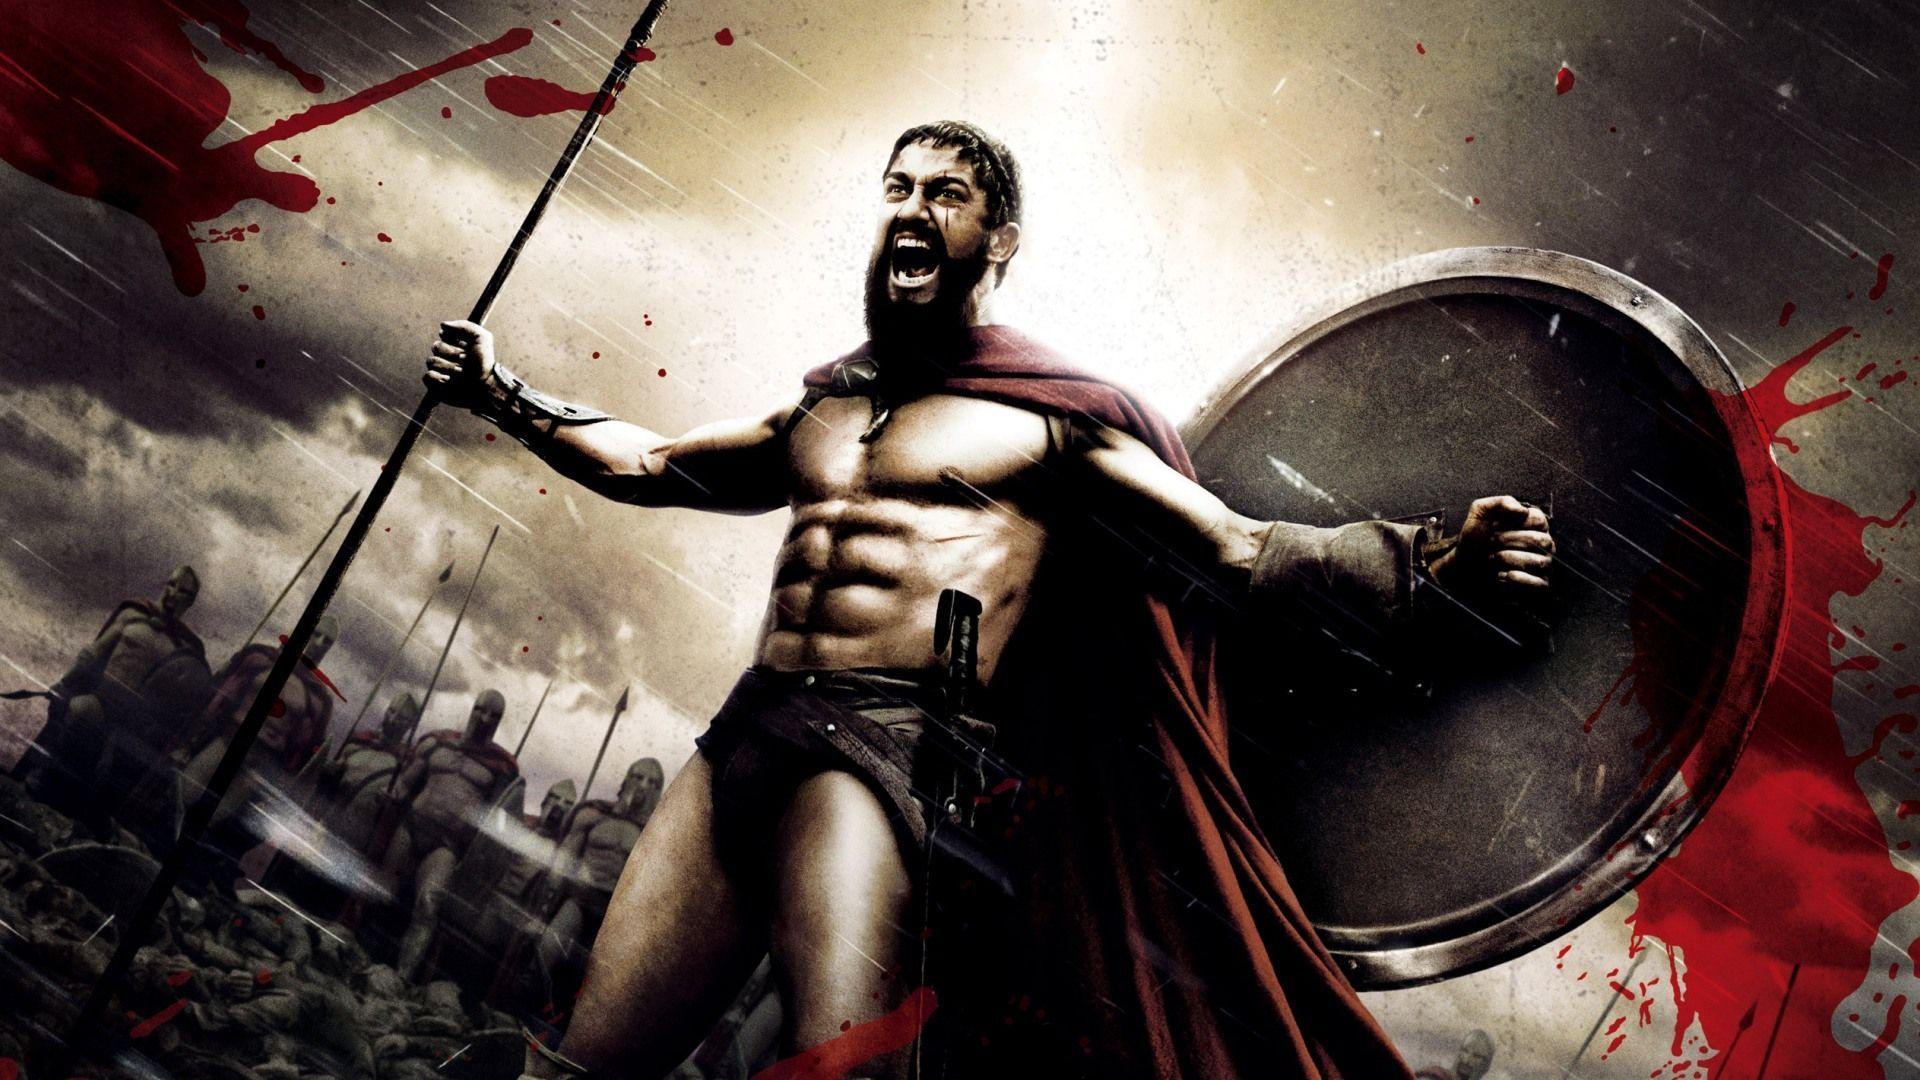 A poster showing the film '300'. King Leonidas stands roaring in his armour